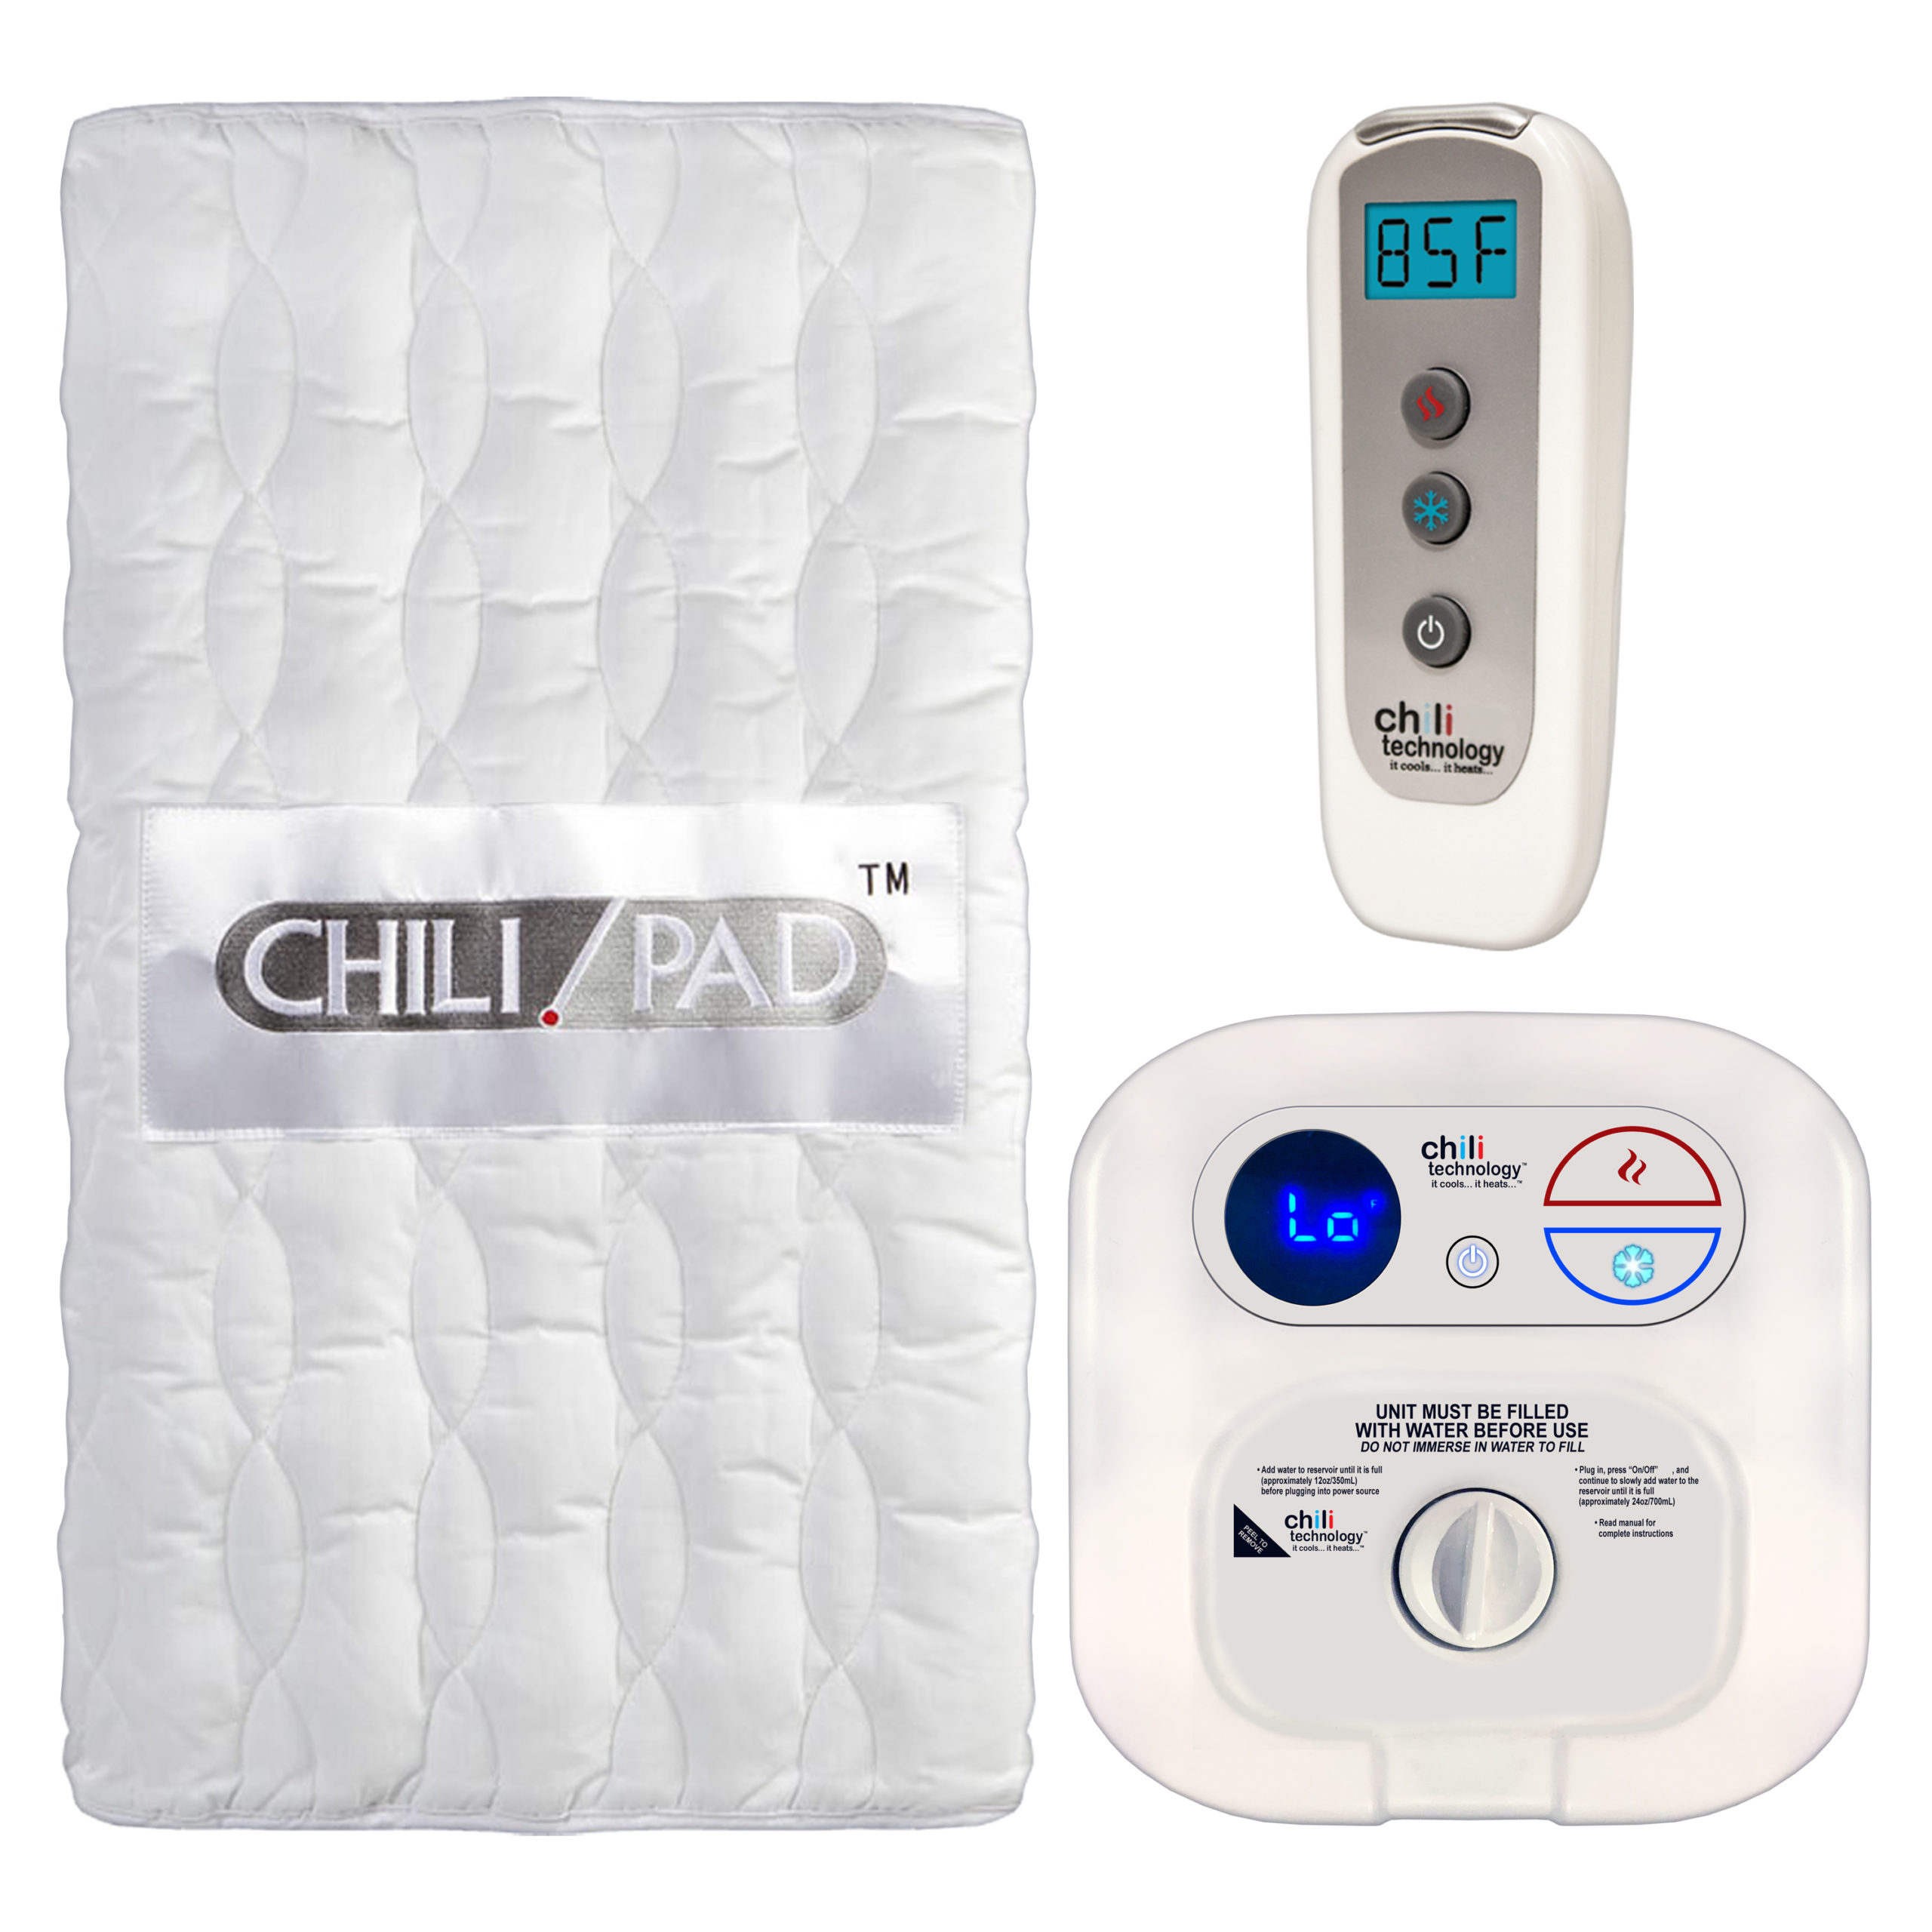 Comfortable Weighted Blanket - Chilipad|Temperature|Mattress|Cube|Sleep|Bed|Water|System|Pad|Ooler|Control|Unit|Night|Bedjet|Technology|Side|Air|Product|Review|Body|Time|Degrees|Noise|Price|Pod|Tubes|Heat|Device|Cooling|Room|King|App|Features|Size|Cover|Sleepers|Sheets|Energy|Warranty|Quality|Mattress Pad|Control Unit|Cube Sleep System|Sleep Pod|Distilled Water|Remote Control|Sleep System|Desired Temperature|Water Tank|Chilipad Cube|Chili Technology|Deep Sleep|Pro Cover|Ooler Sleep System|Hydrogen Peroxide|Cool Mesh|Sleep Temperature|Fitted Sheet|Pod Pro|Sleep Quality|Smartphone App|Sleep Systems|Chilipad Sleep System|New Mattress|Sleep Trial|Full Refund|Mattress Topper|Body Heat|Air Flow|Chilipad Review